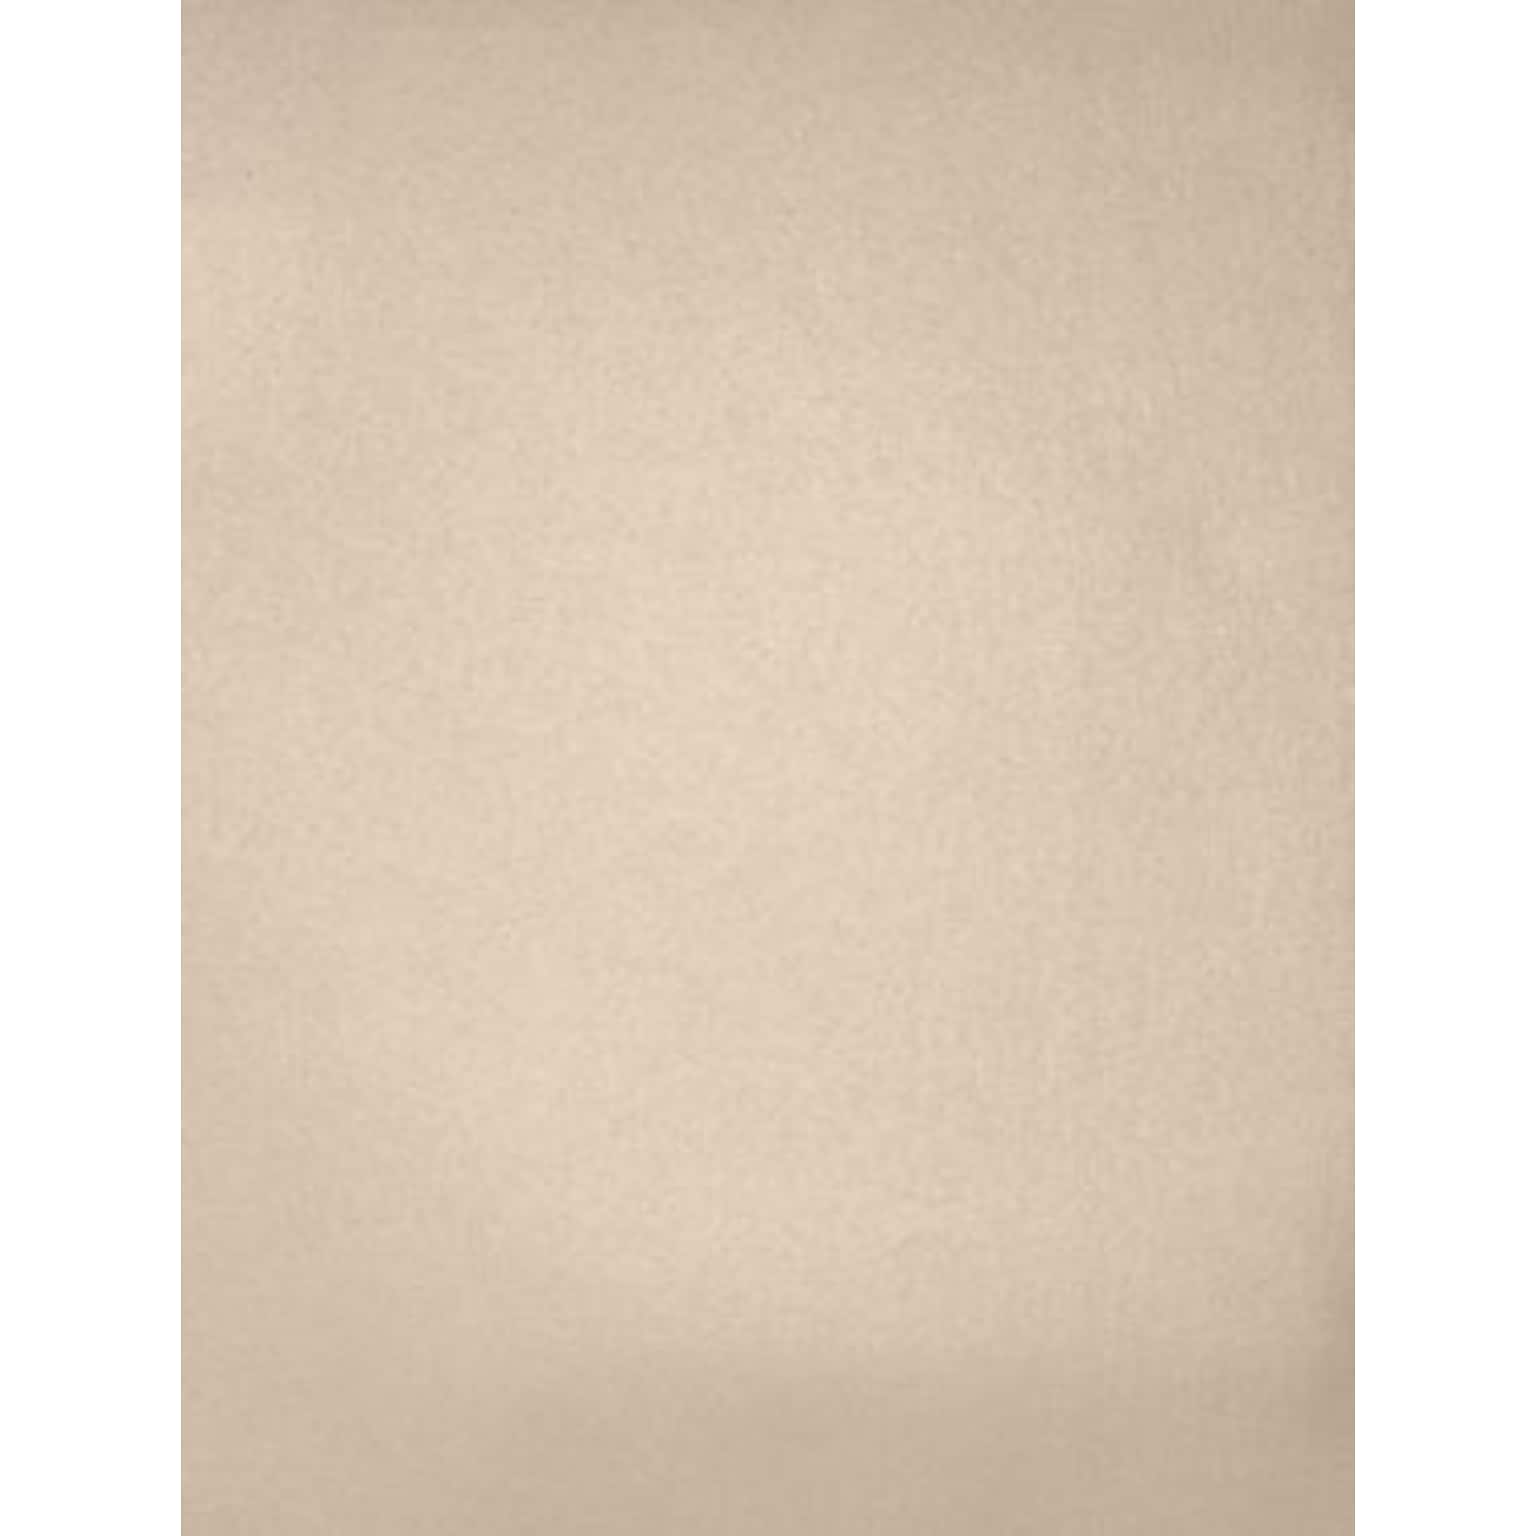 LUX Colored Paper, 32 lbs., 8.5 x 11, Taupe Metallic, 50 Sheets/Pack (81211-P-M09-50)